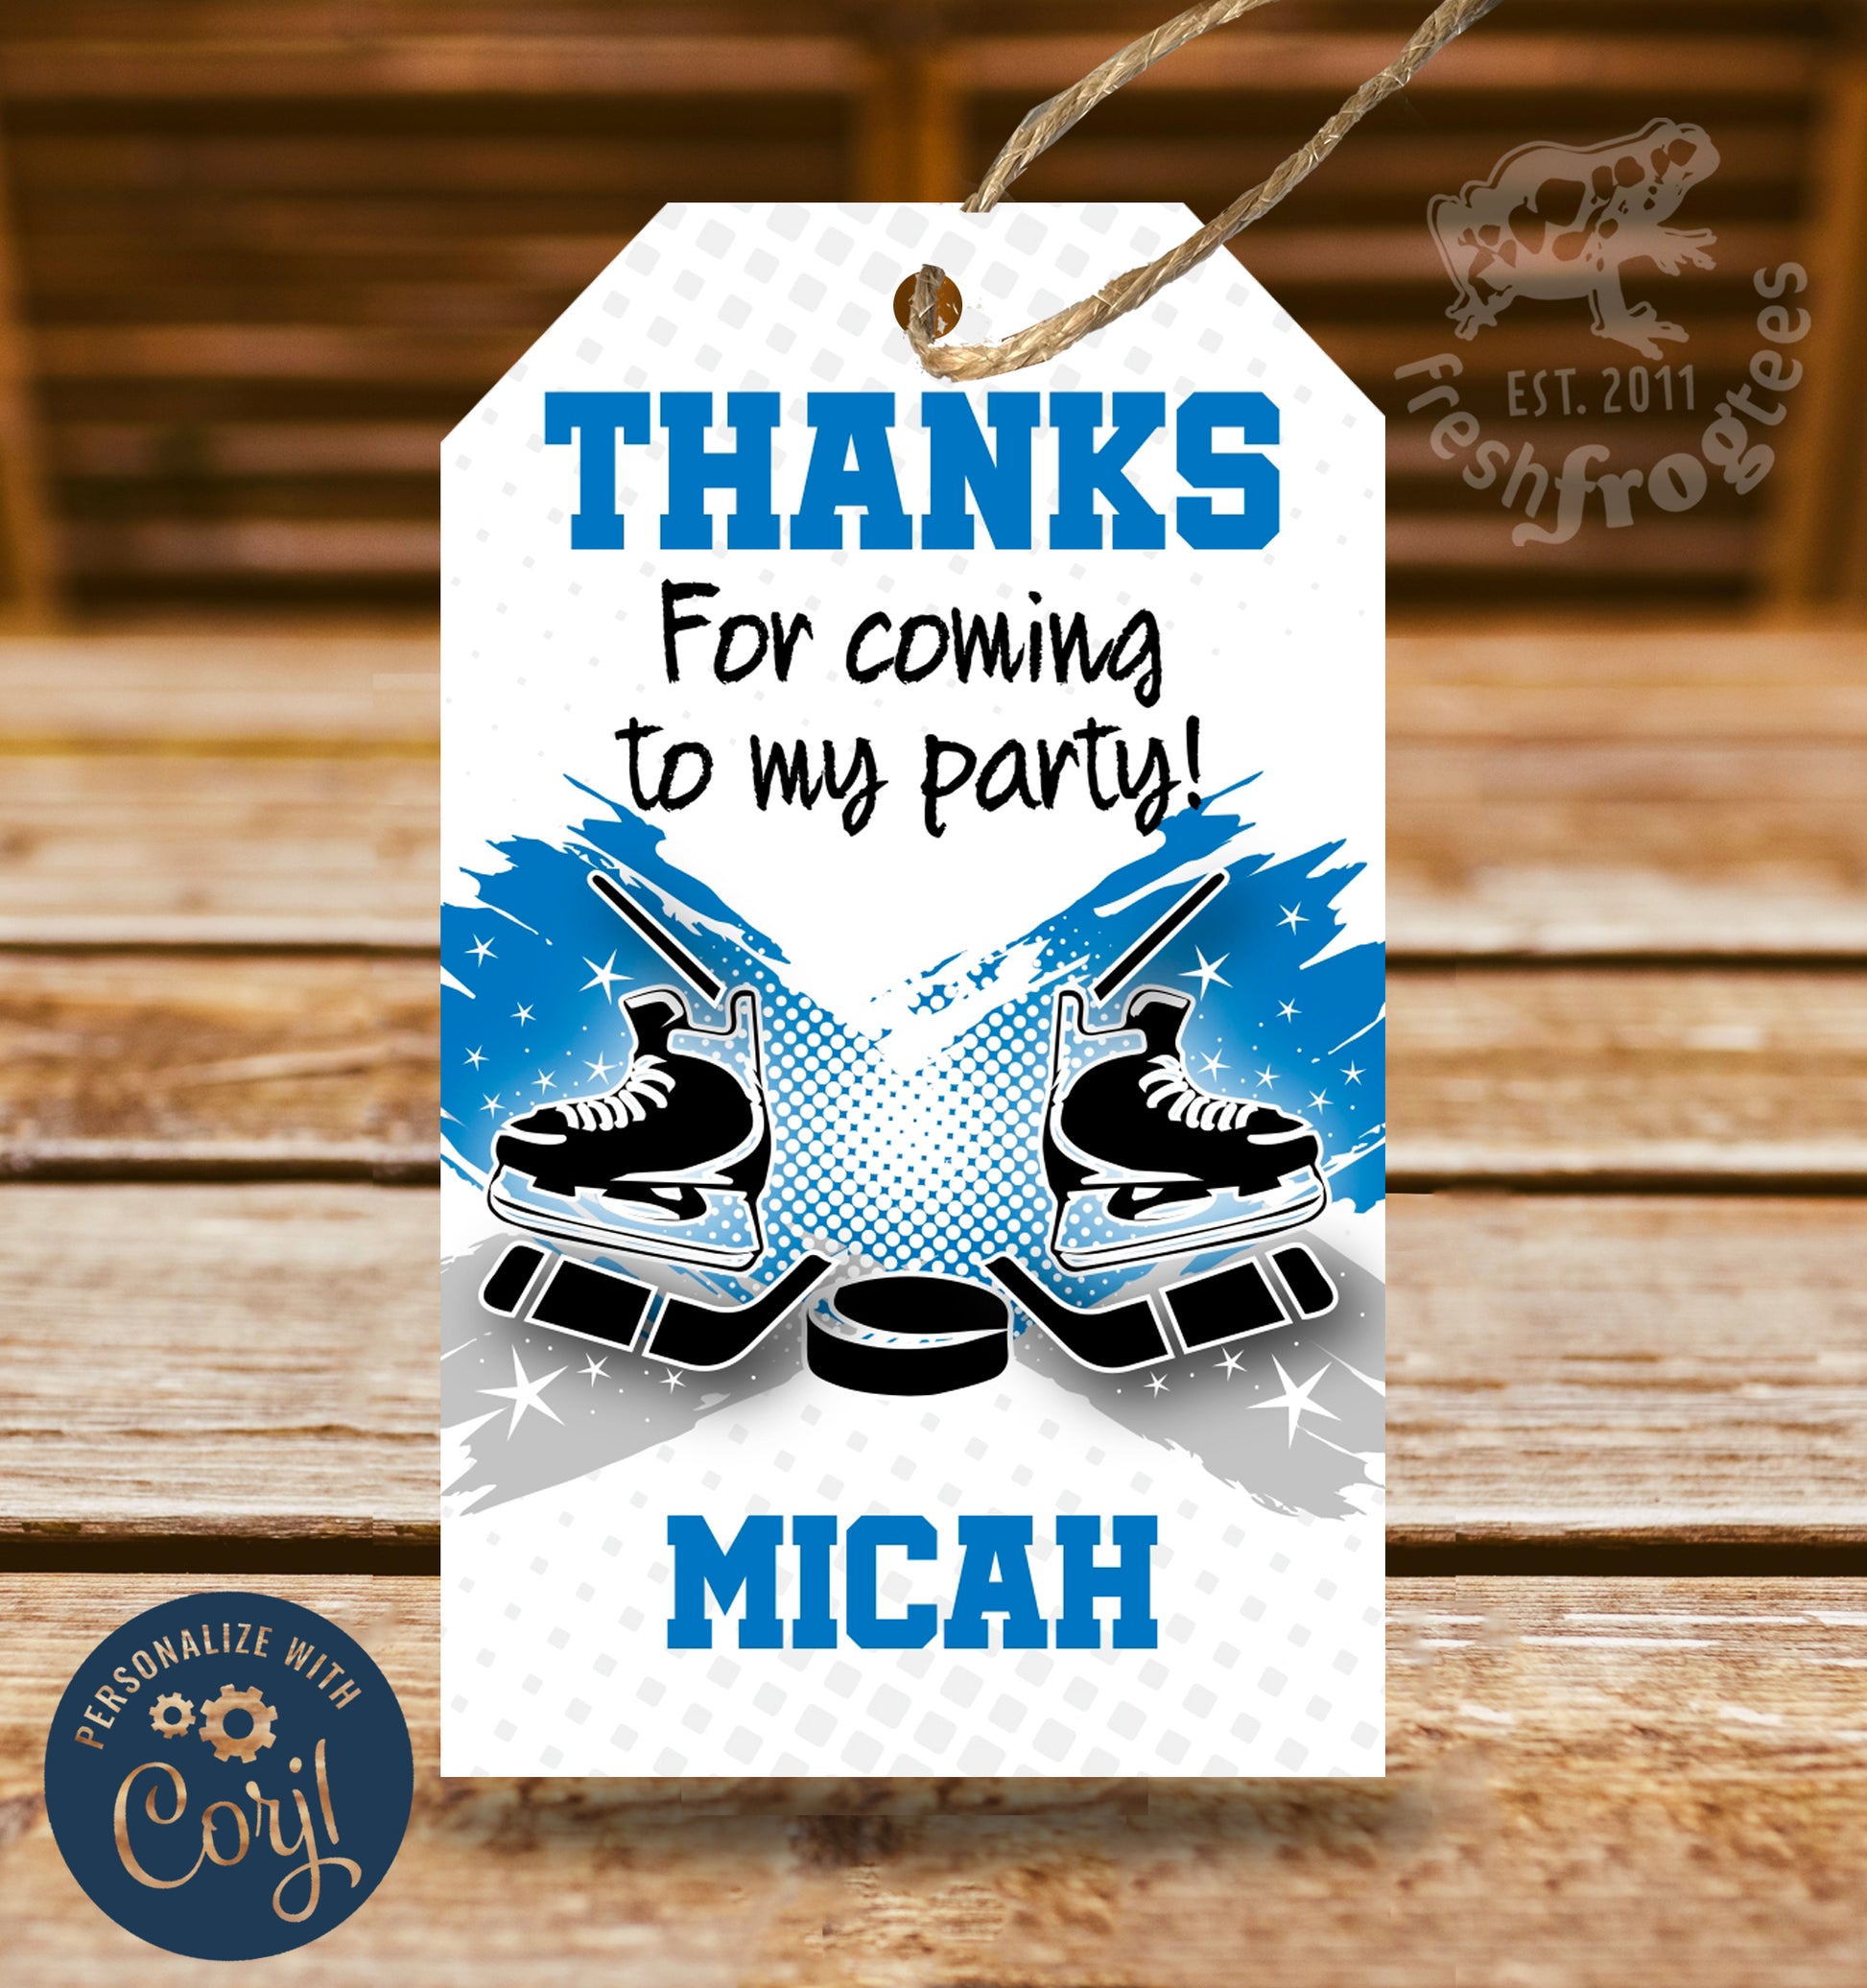 Editable hockey-themed party favor thank you tag template with hockey sticks and pucks design, perfect for kids' birthday parties. Instant download and easy to personalize.